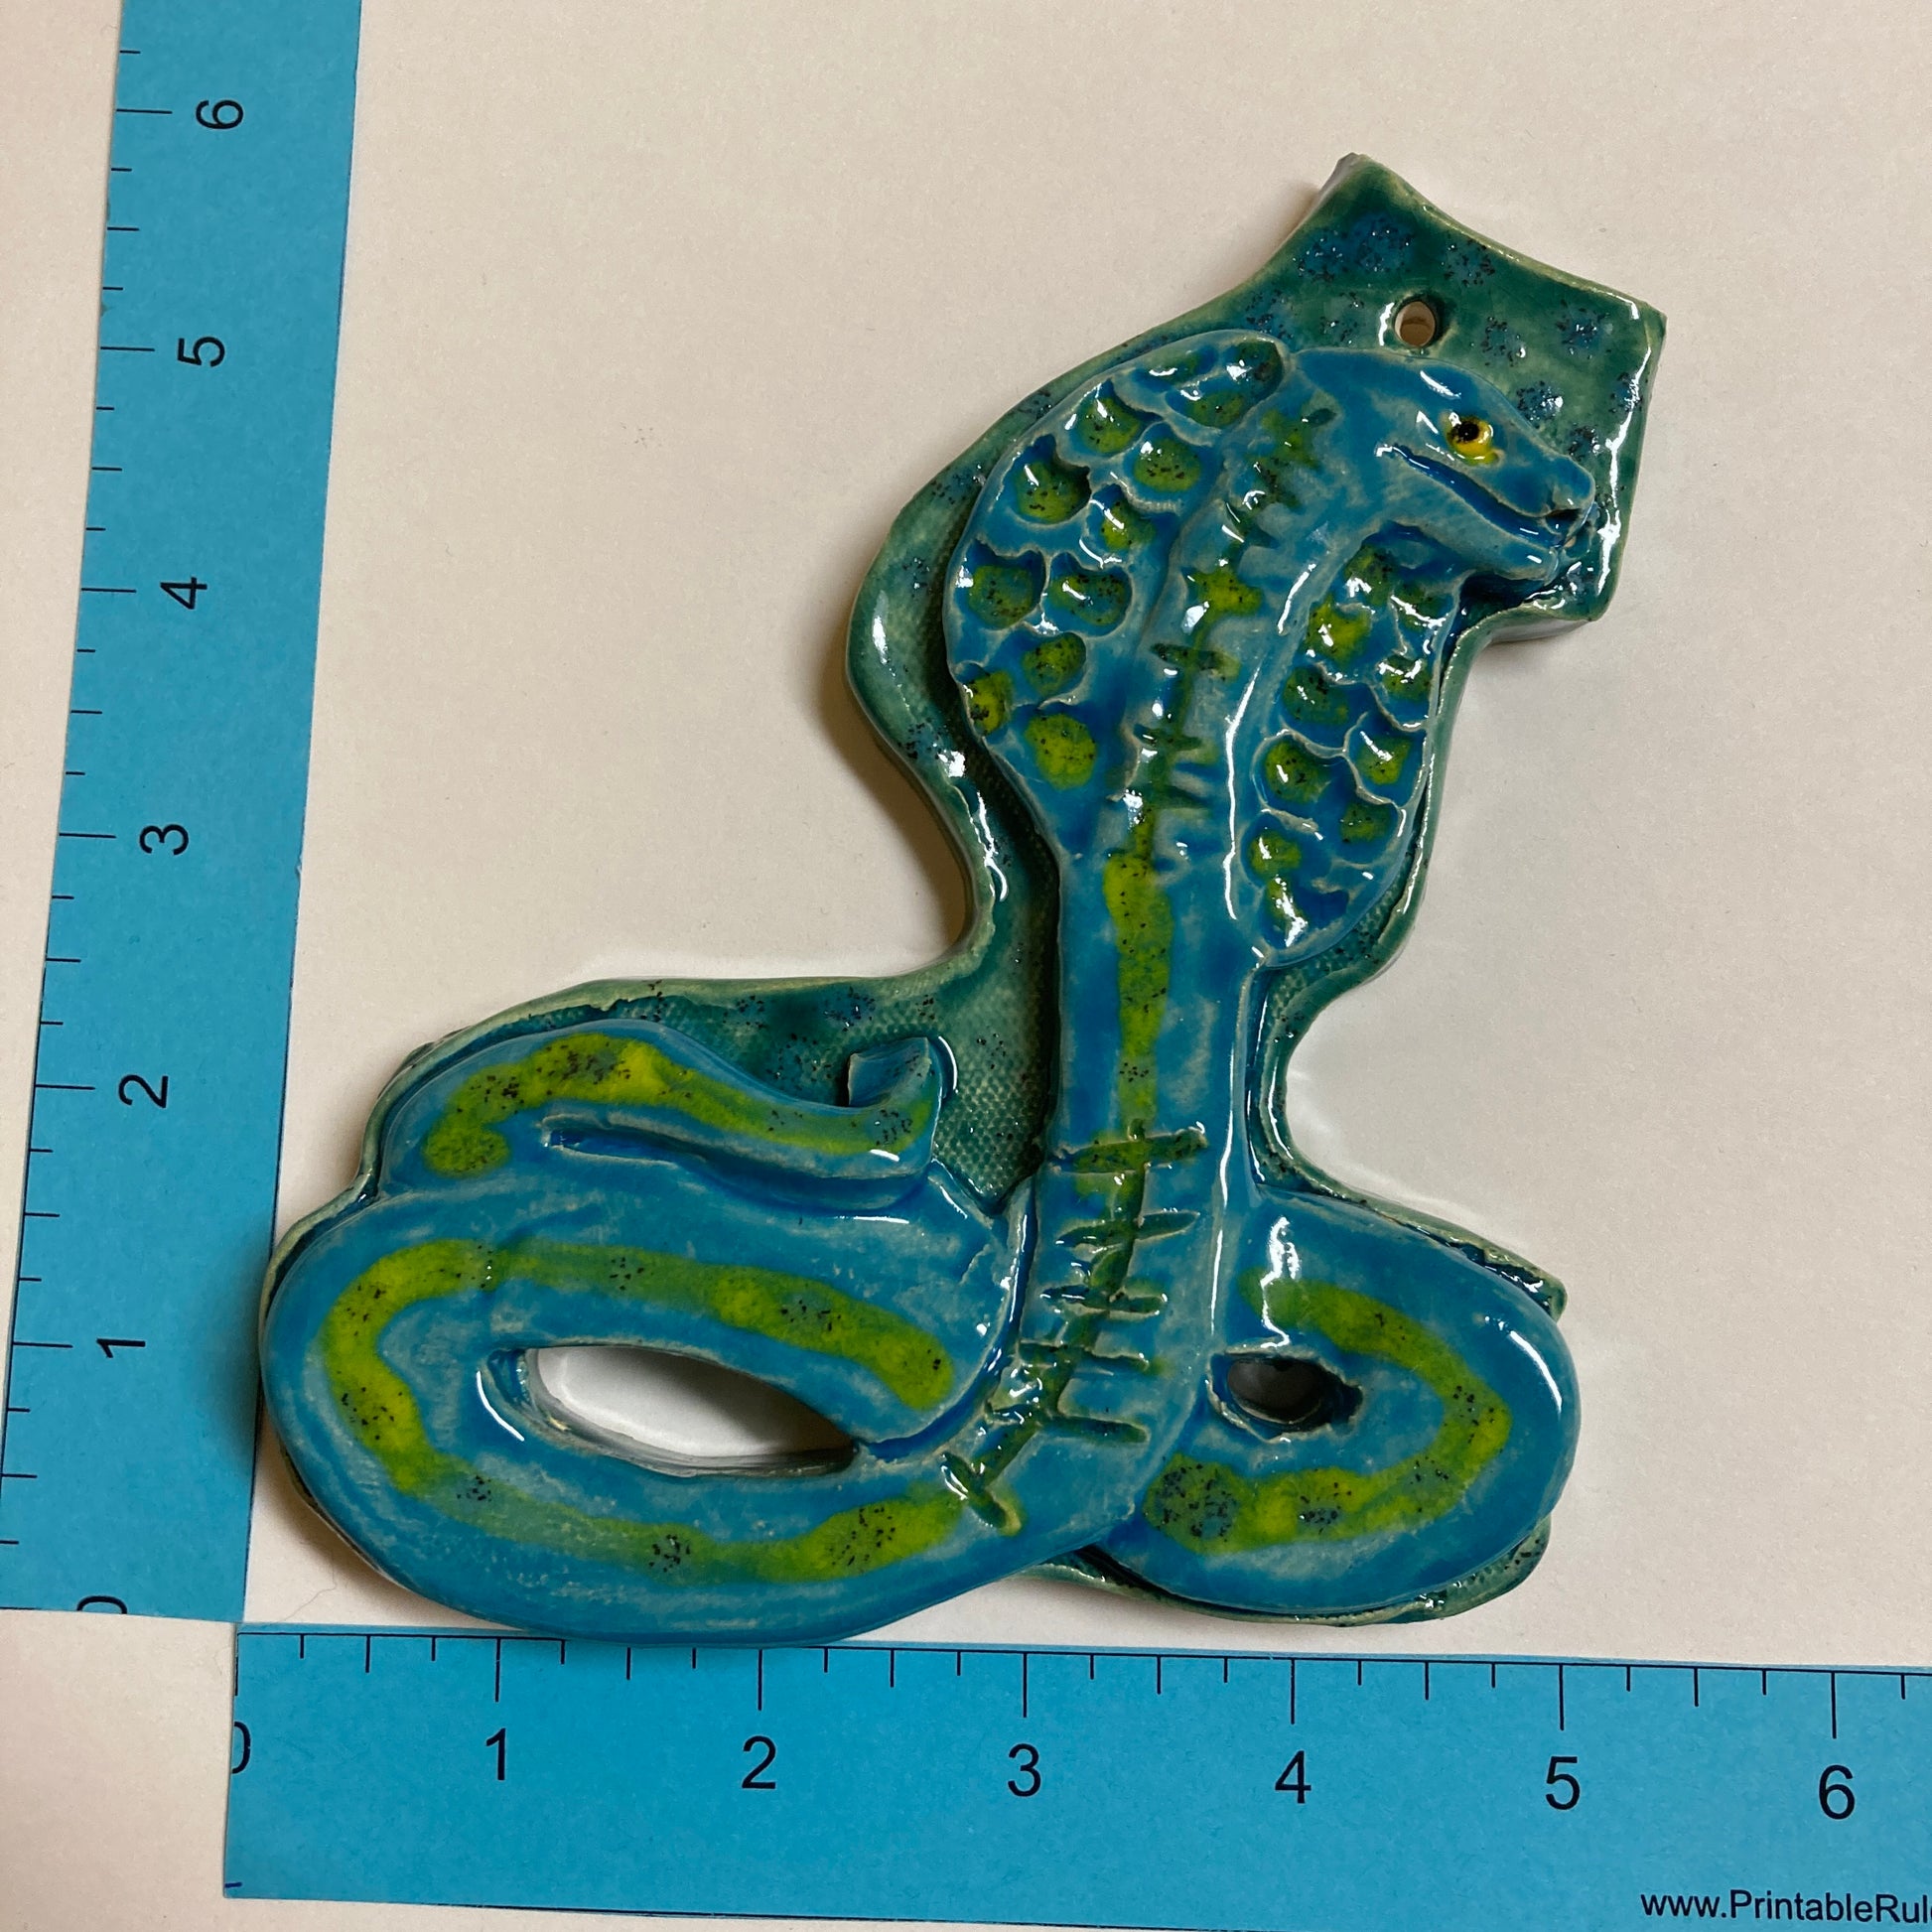 WATCH Resources Art Guild - Ceramic Arts Handmade Clay Crafts 6-inch x 6-inch Glazed Snake by Lisa Uptain